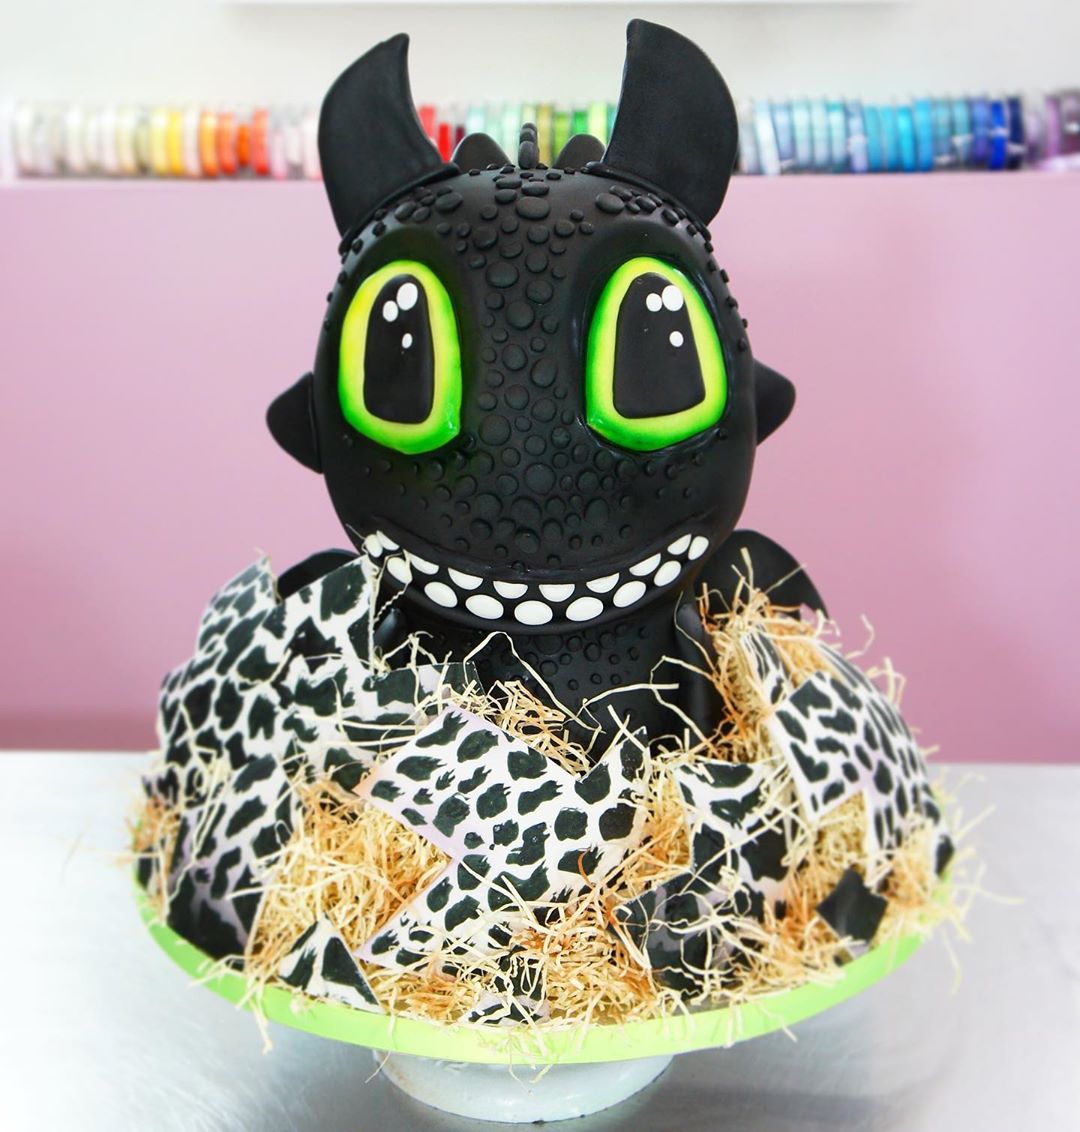 HOW TO TRAIN YOUR DRAGON Themed Birthday Cake Topper Set Featuring NIGHT  FURY TOOTHLESS and Friends Characters and Decorative Themed Accessories :  Amazon.co.uk: Toys & Games